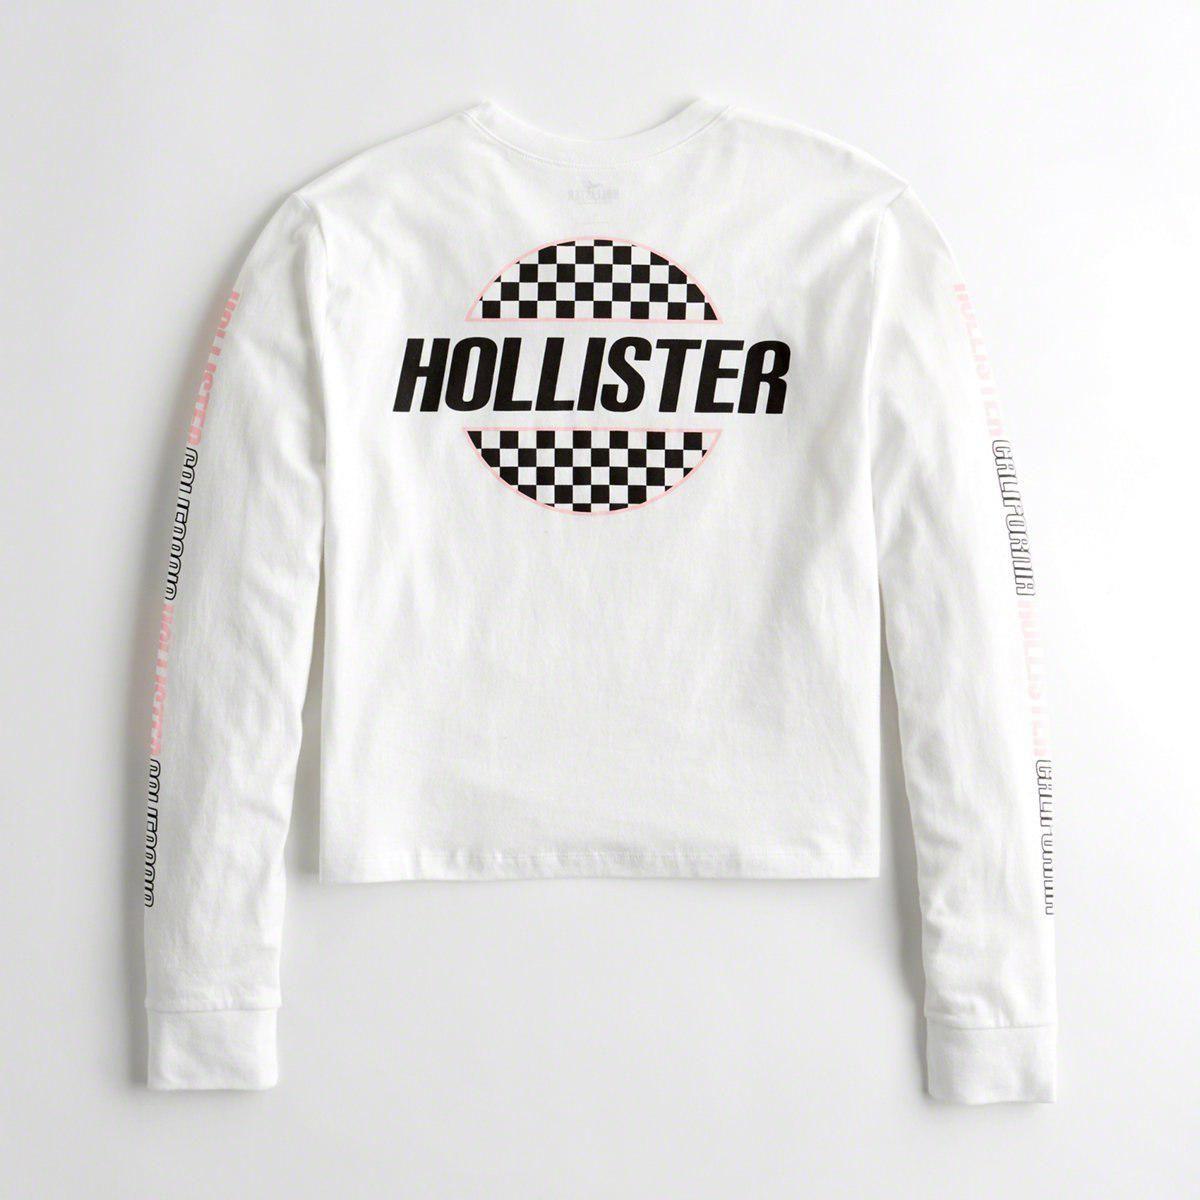 Black and White Checkerboard Logo - Lyst Girls Checkerboard Logo Graphic Tee From Hollister